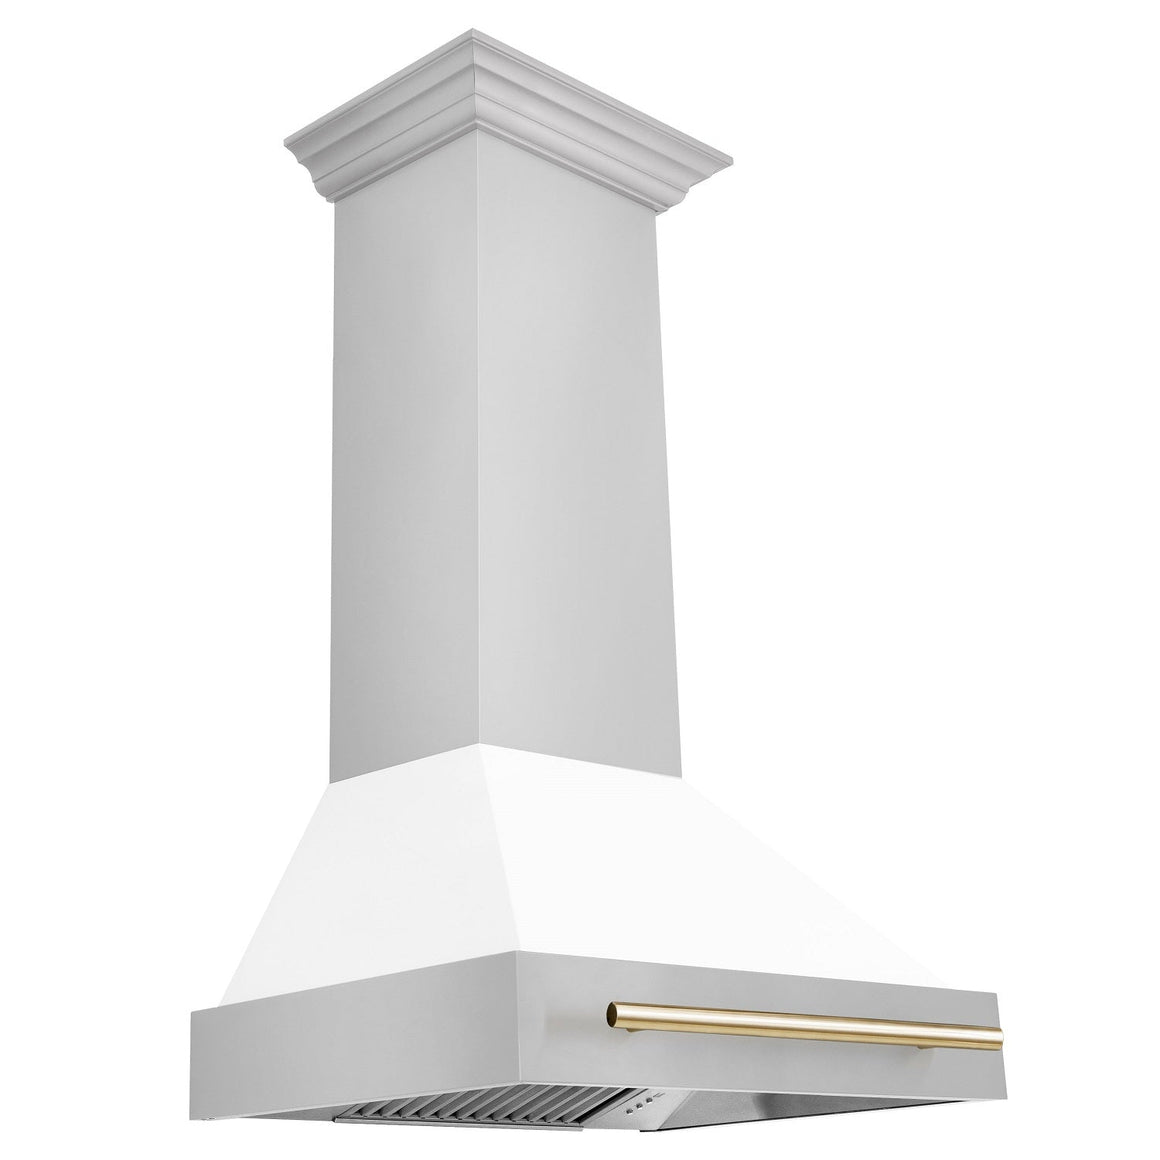 ZLINE 36" Autograph Edition Stainless Steel Range Hood with White Matte Shell and Gold Accents (8654STZ-WM36-G)